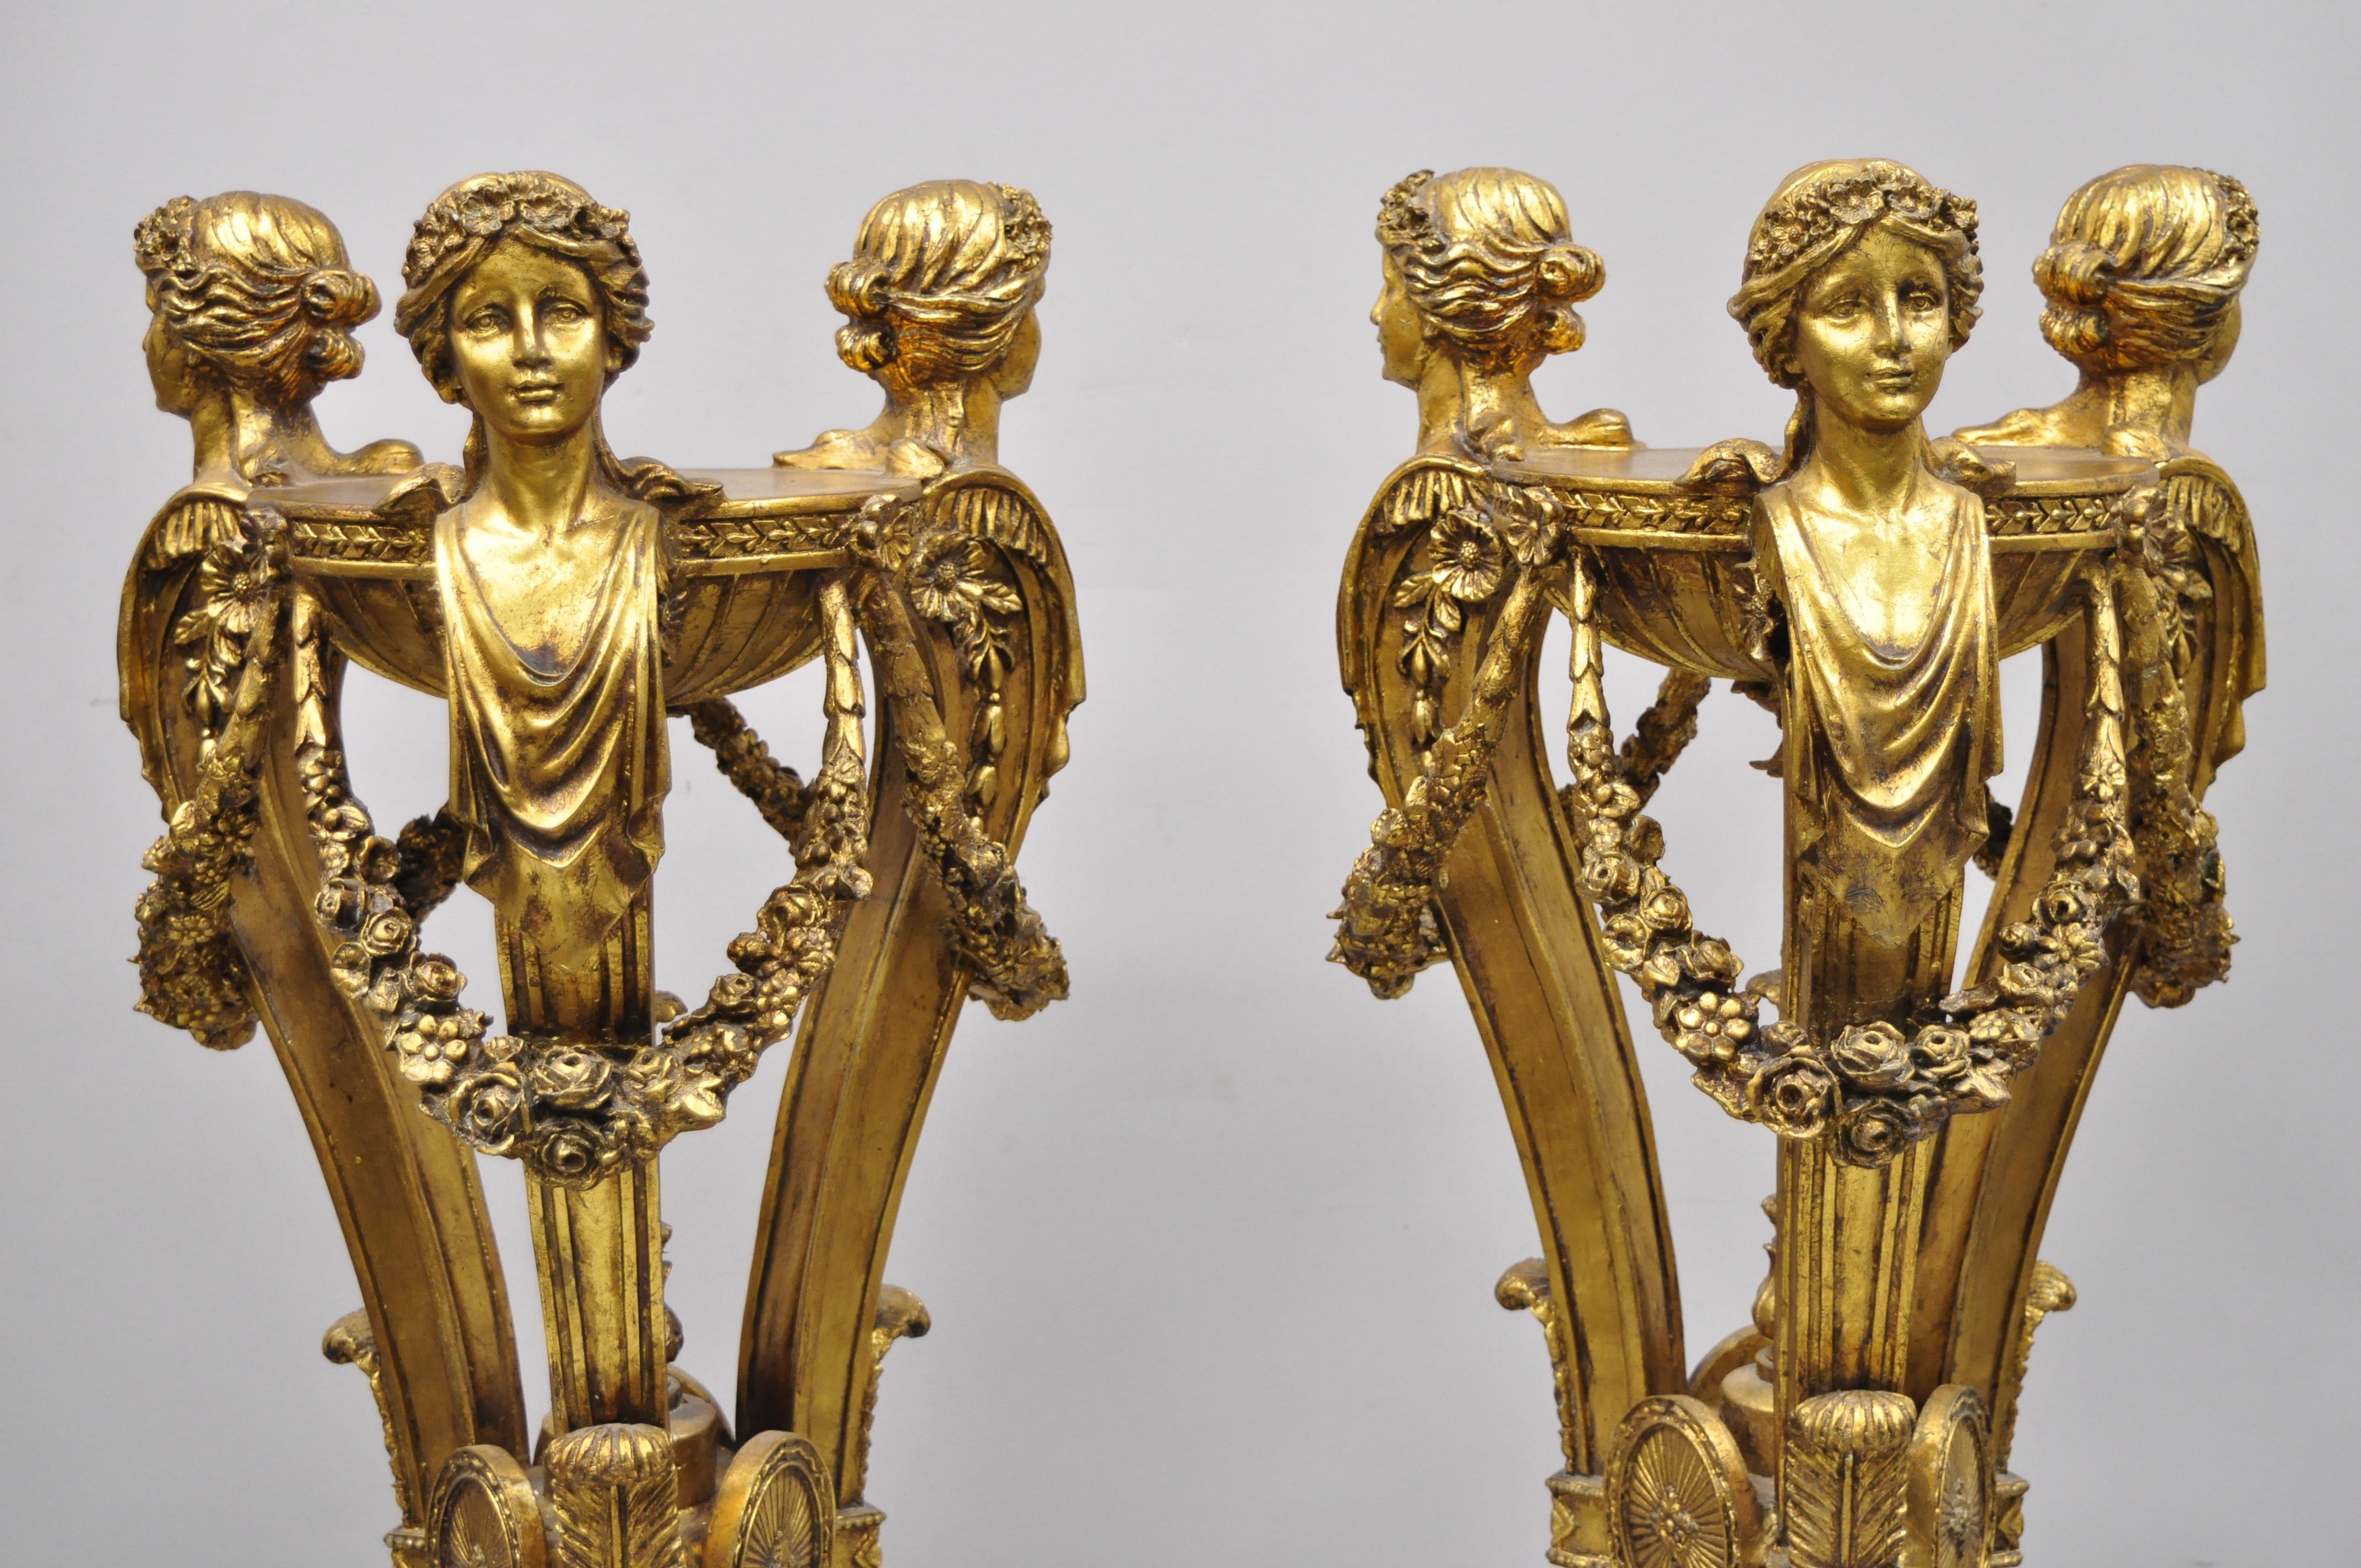 Pair of gold French neoclassical style figural maiden bust hoof foot pedestals. Item features 3 maiden busts, hoof feet, urn form finials, gold leaf finish, cast resin forms, nicely carved details, great style and form, circa mid-20th century.